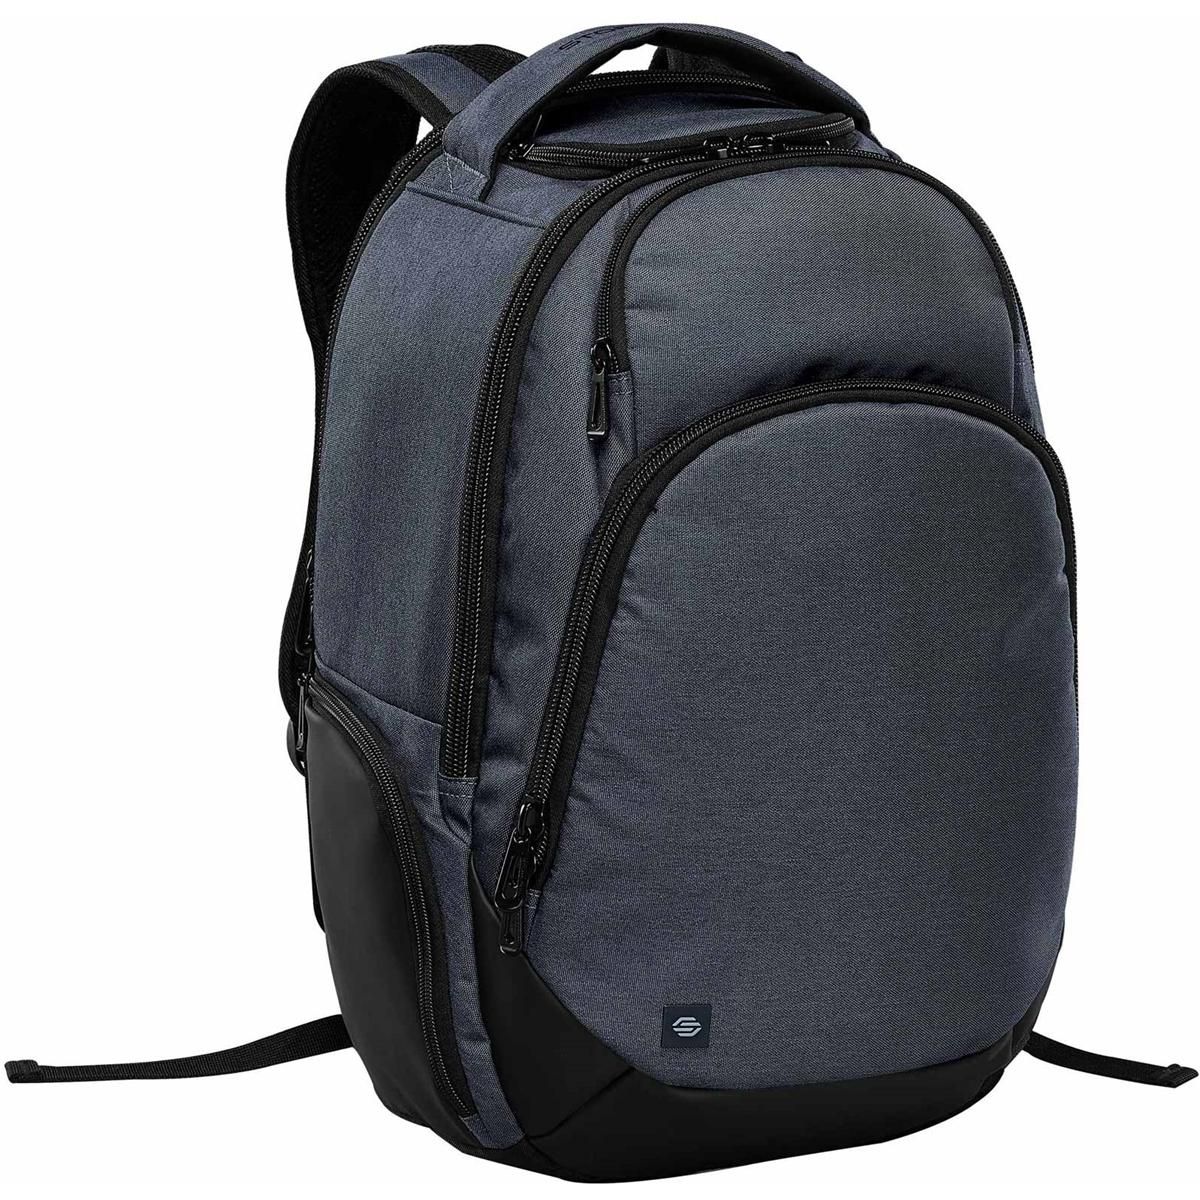 MADISON COMMUTER PACK - Paragon Super Industry